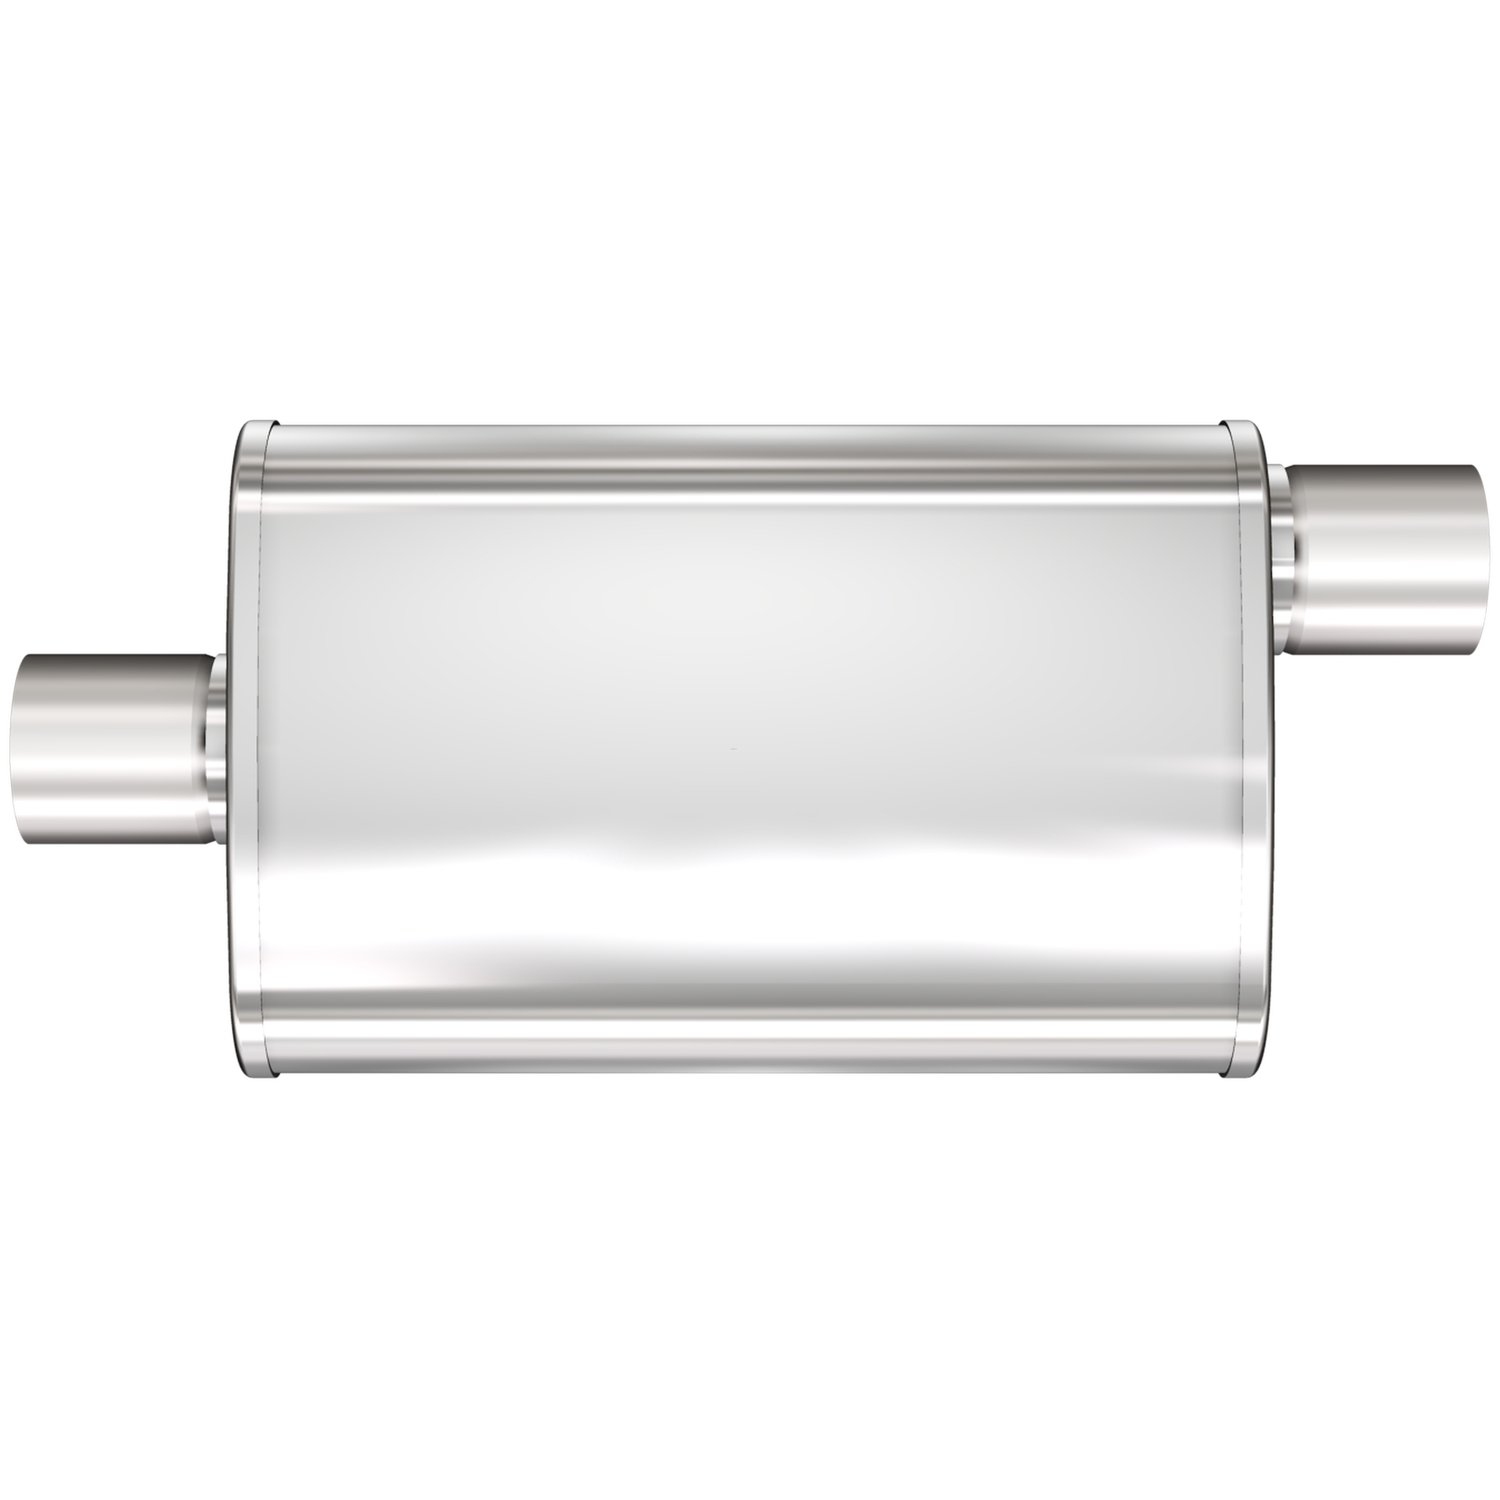 4" x 9" Oval XL 3-Chamber Muffler Center In/Offset Out: 2"/2" Body Length: 18" Overall Length: 24" Satin Finish